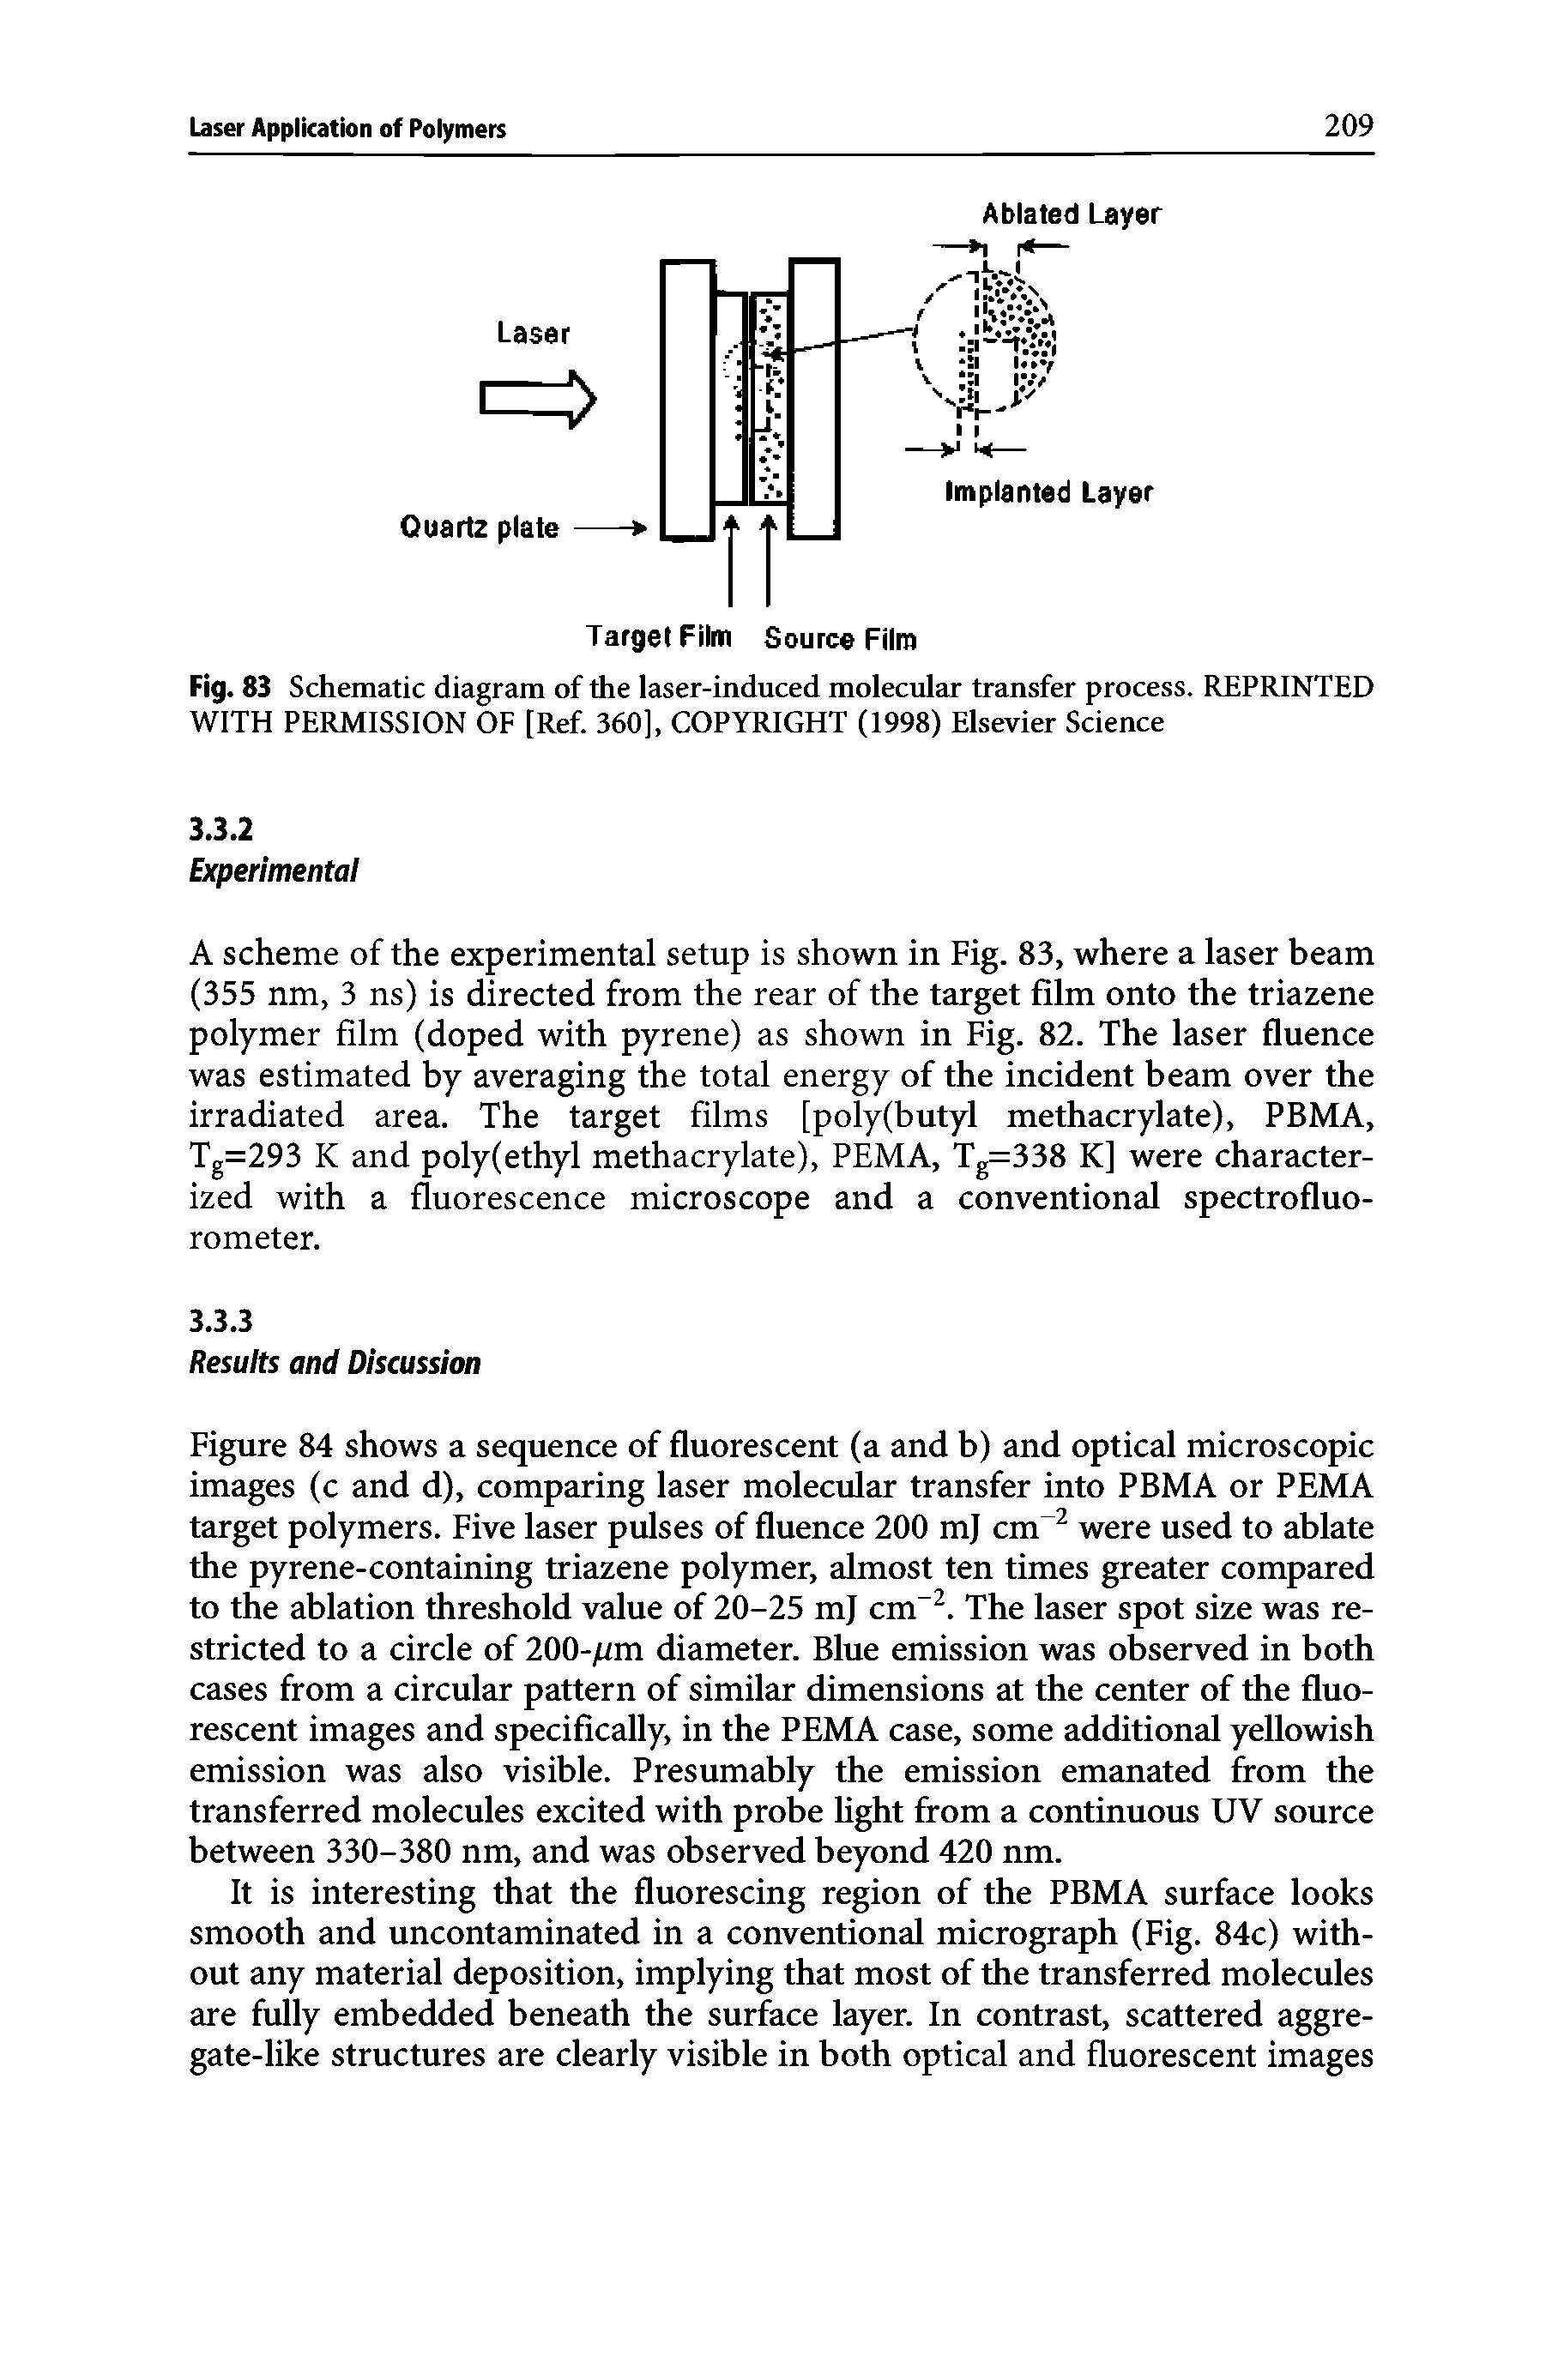 Fig. 83 Schematic diagram of the laser-induced molecular transfer process. REPRINTED WITH PERMISSION OF [Ref. 360], COPYRIGHT (1998) Elsevier Science...